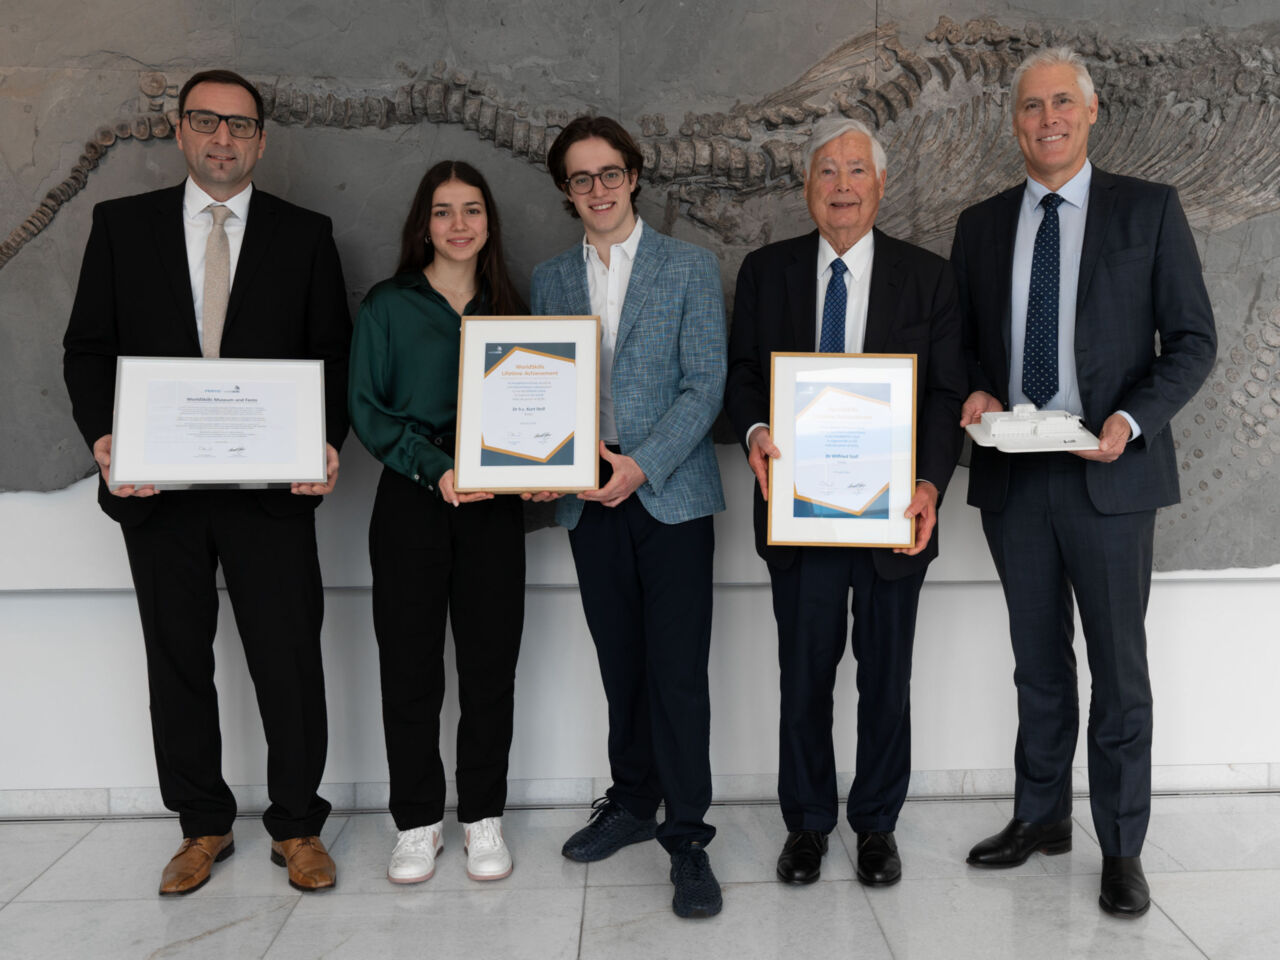 WorldSkills recognizes Festo owners for a lifetime of achievements in skills development